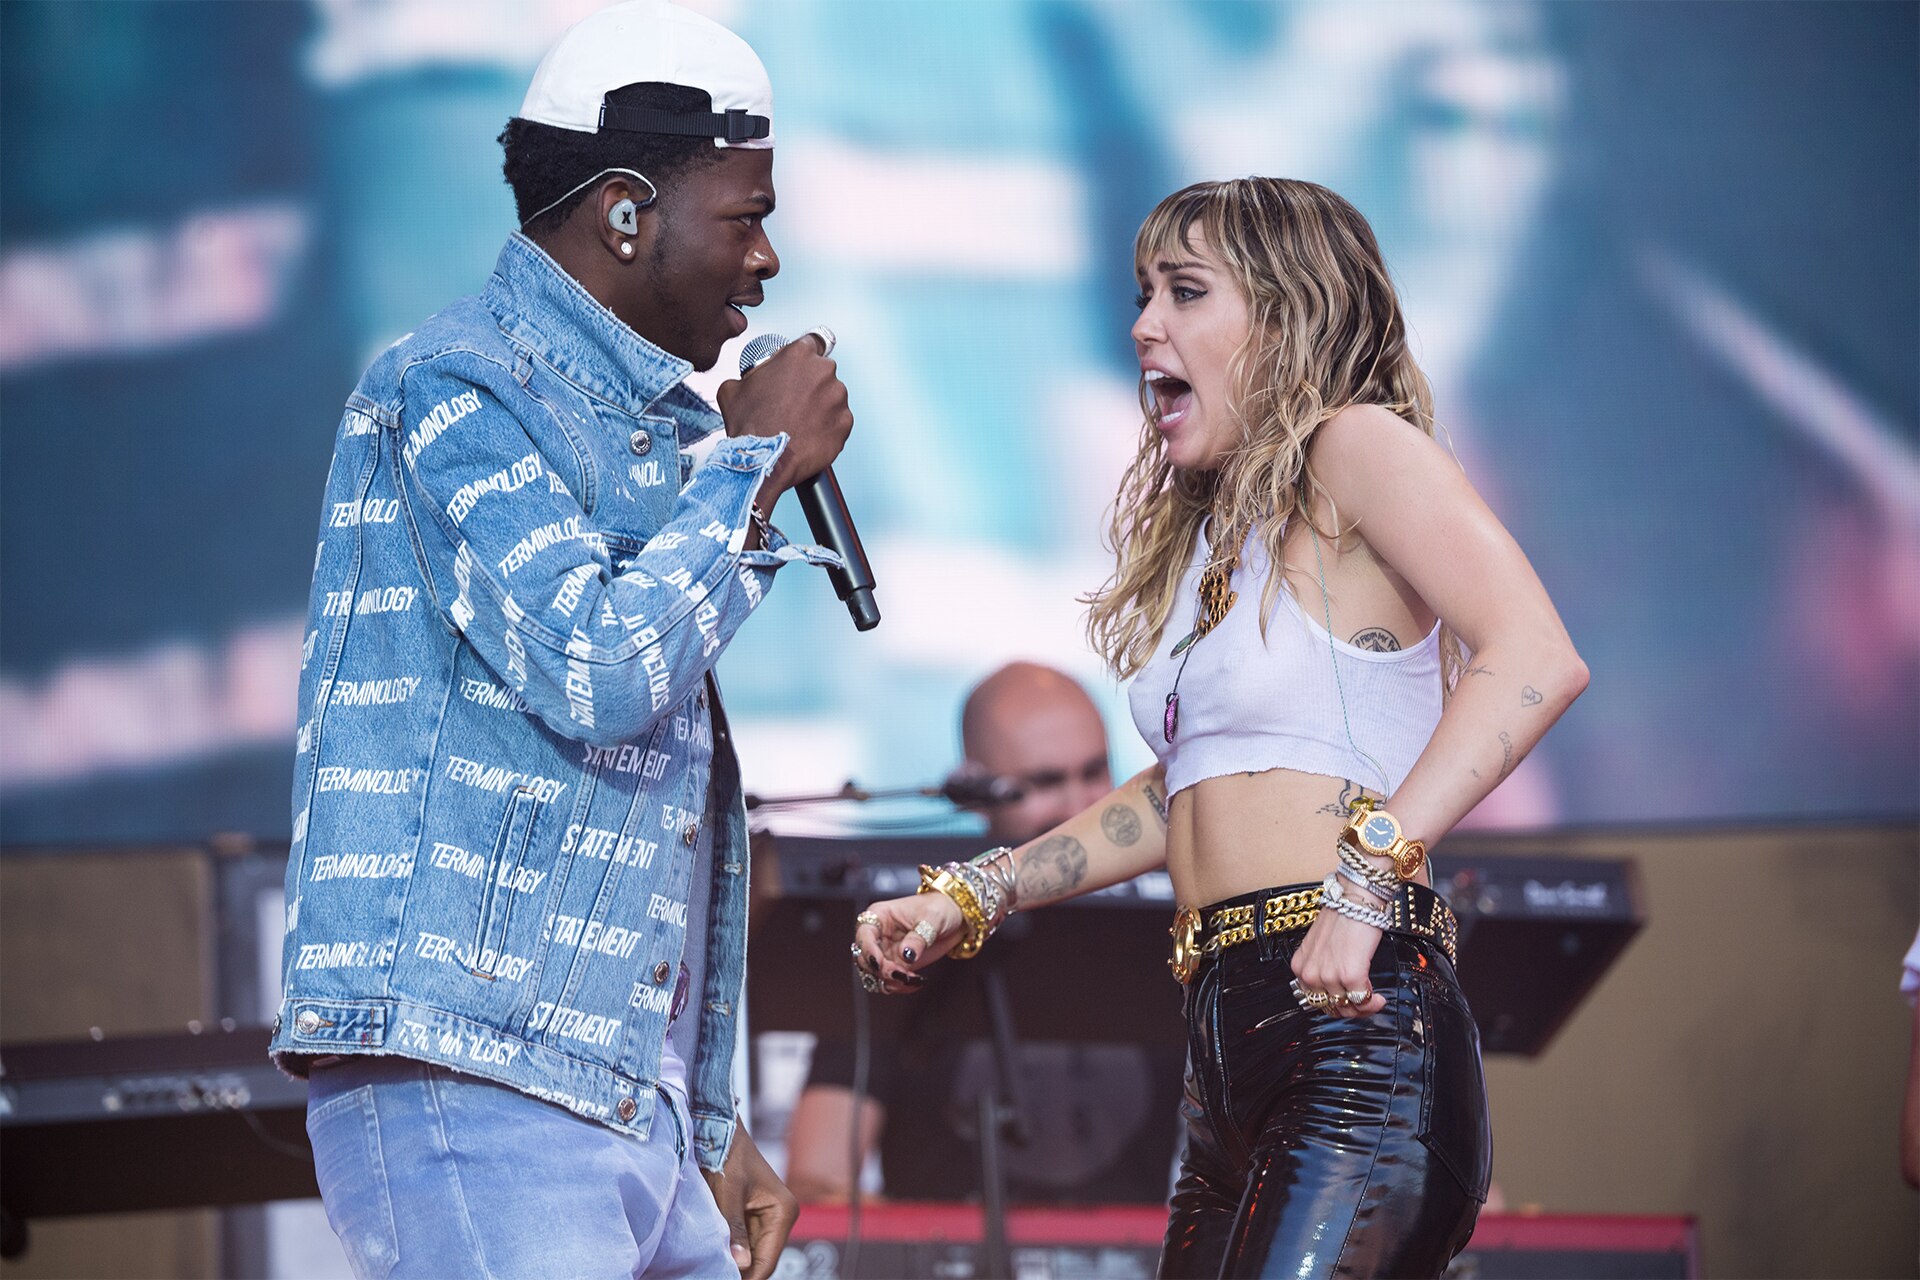 Miley Cyrus And Lil Nas X Are Headed To Melbourne For A Bushfire Relief Concert - GQ Australia